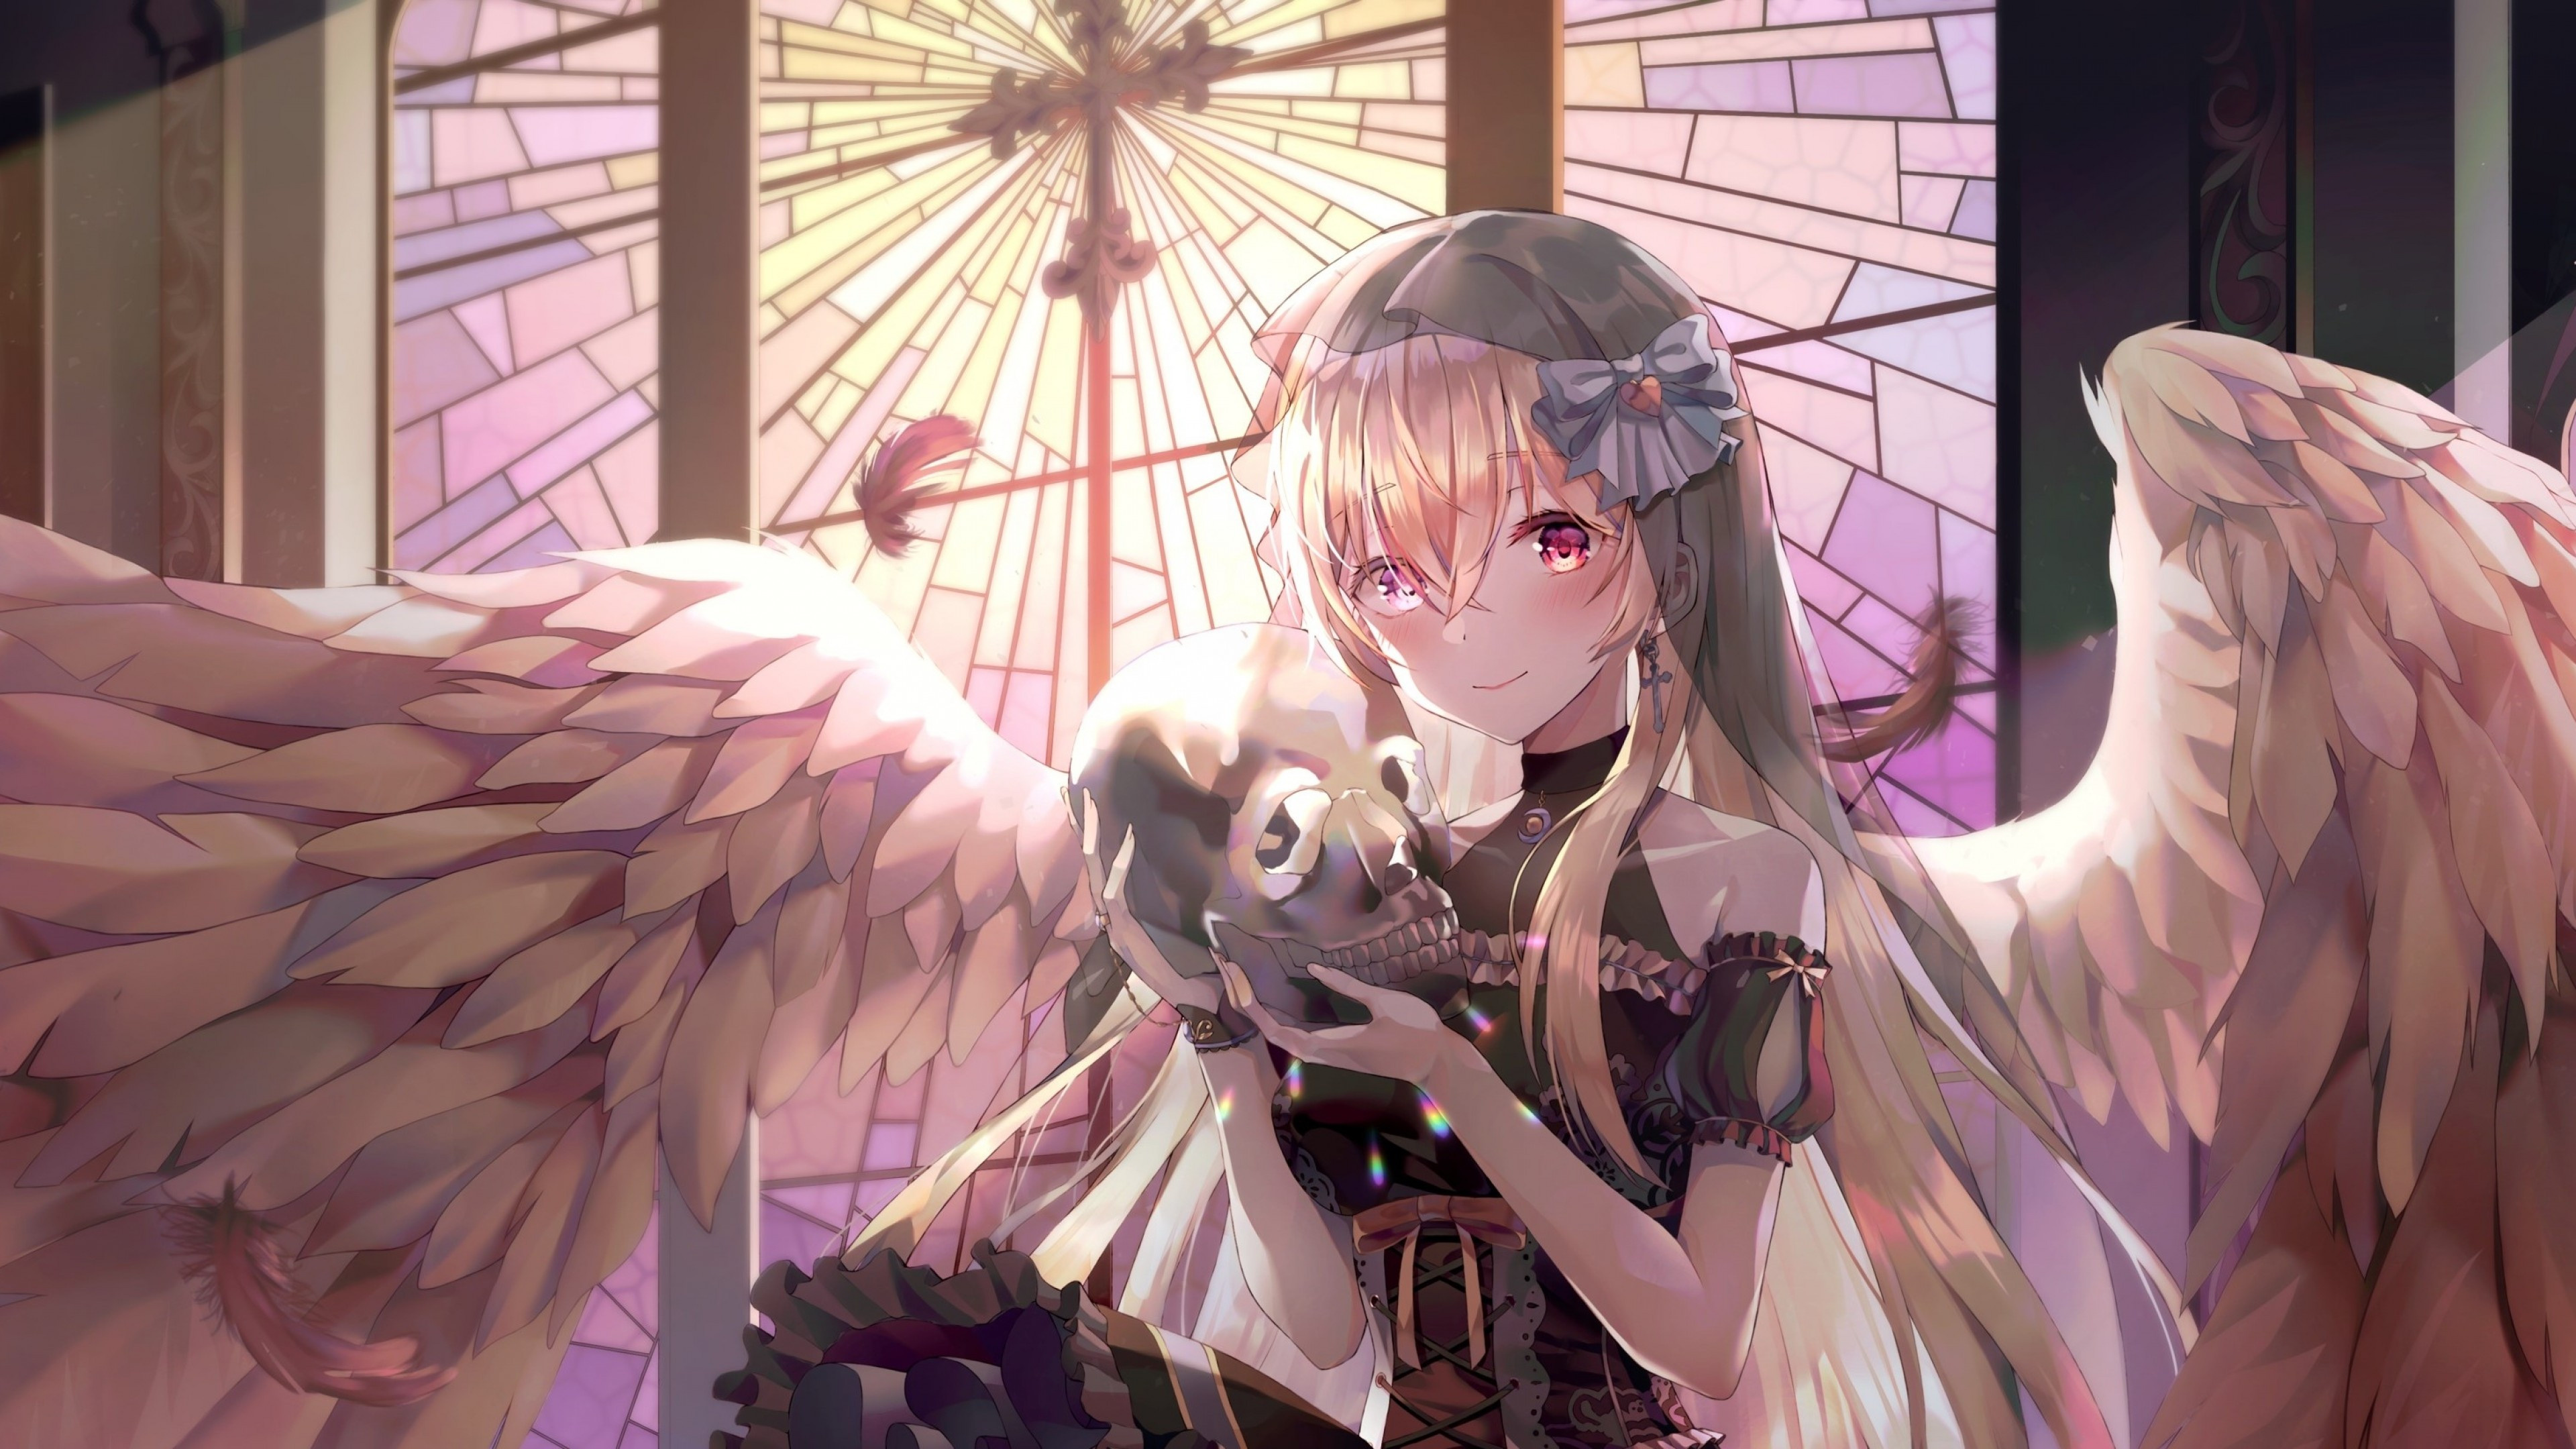 Gothic Anime: Fallen angel, Girl with long wings, Skull, Temple, Celestial creature. 3840x2160 4K Background.